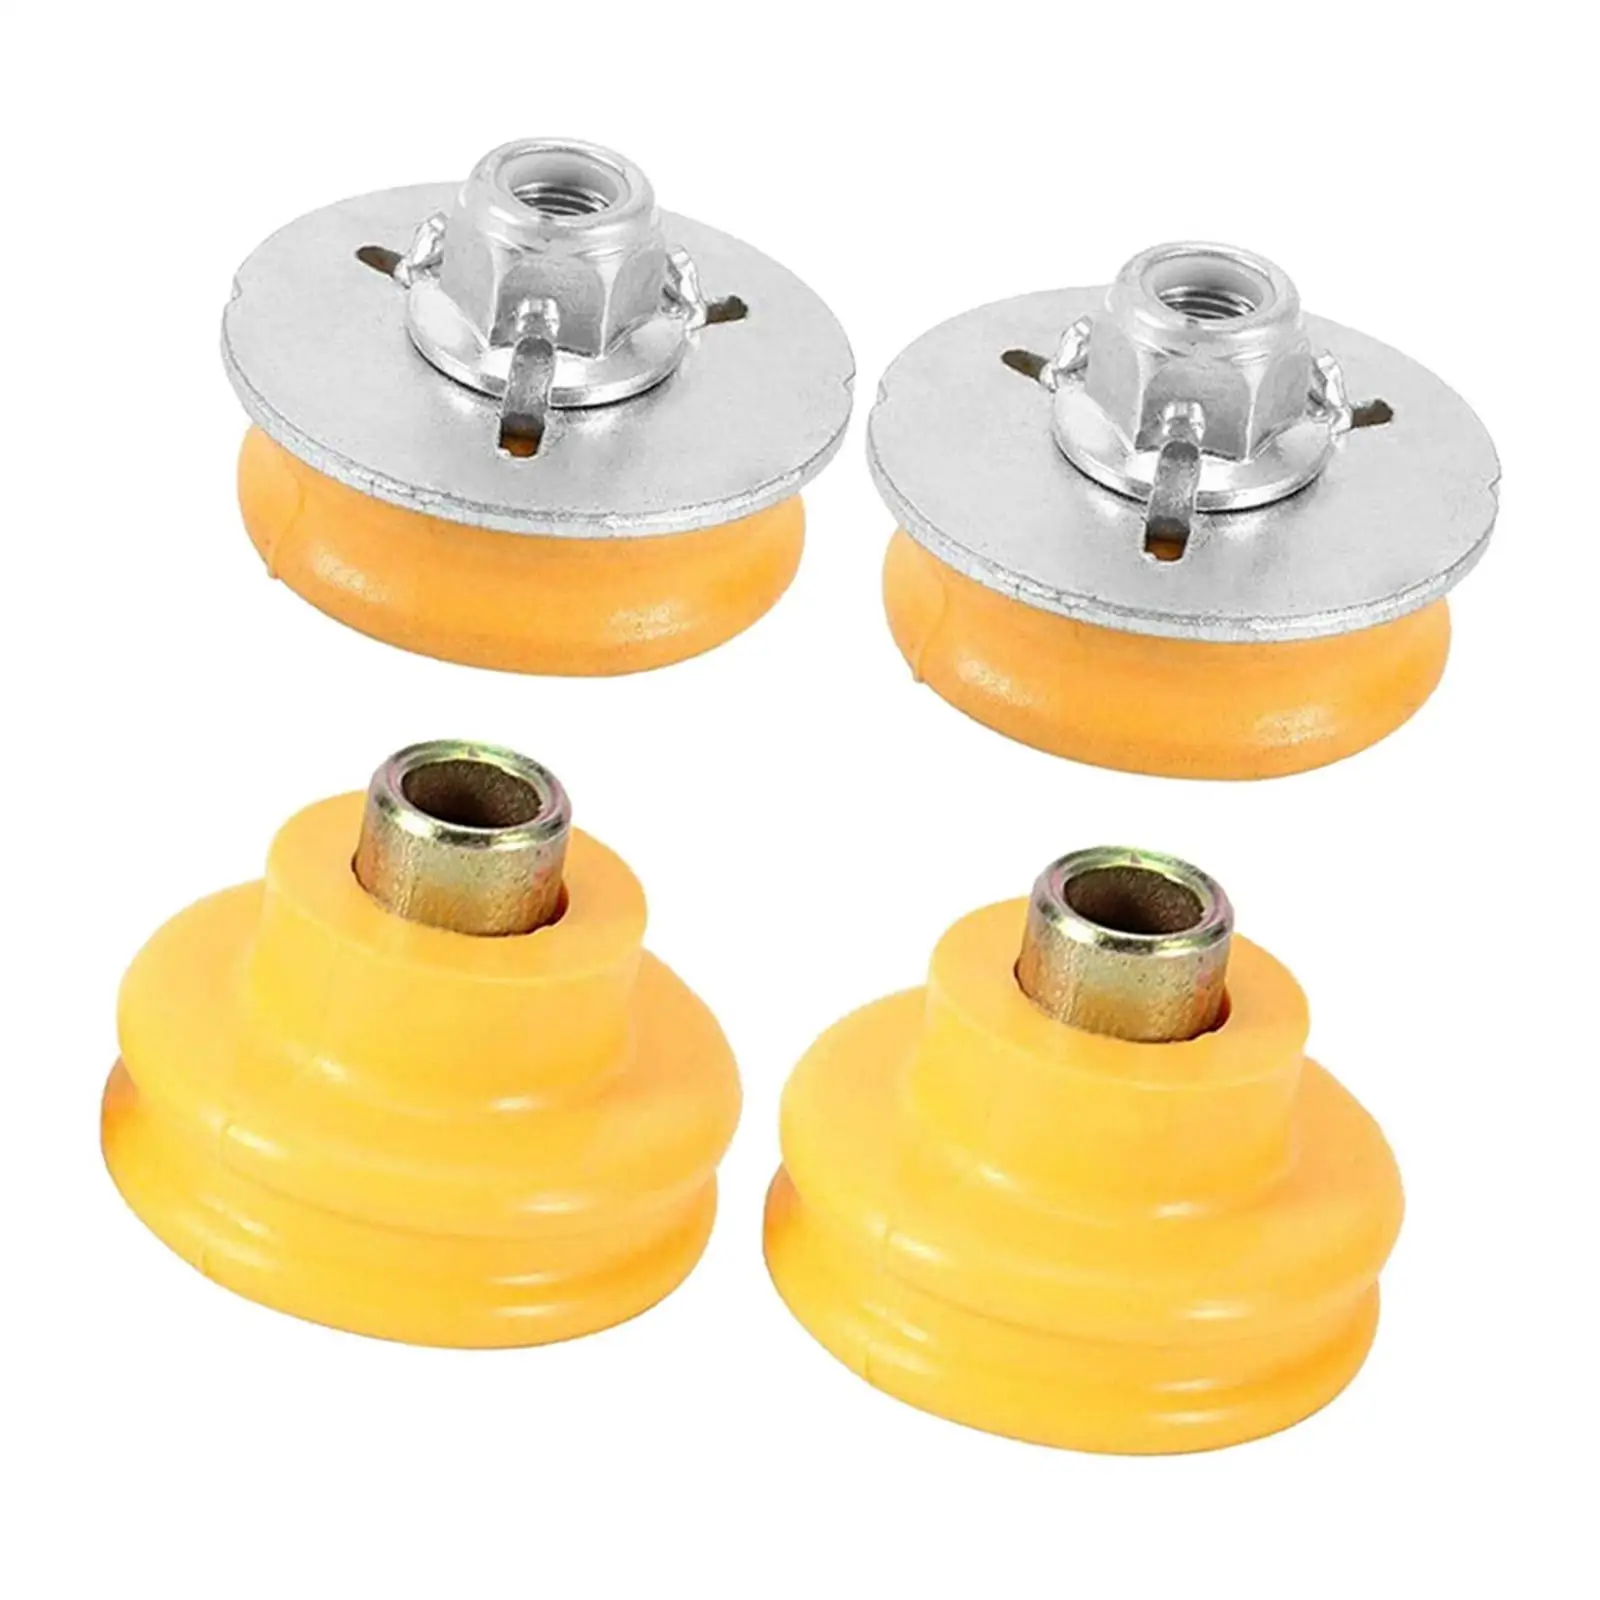 33506771738 Replacement Car Accessories Rear Shock Mounts Set for BMW